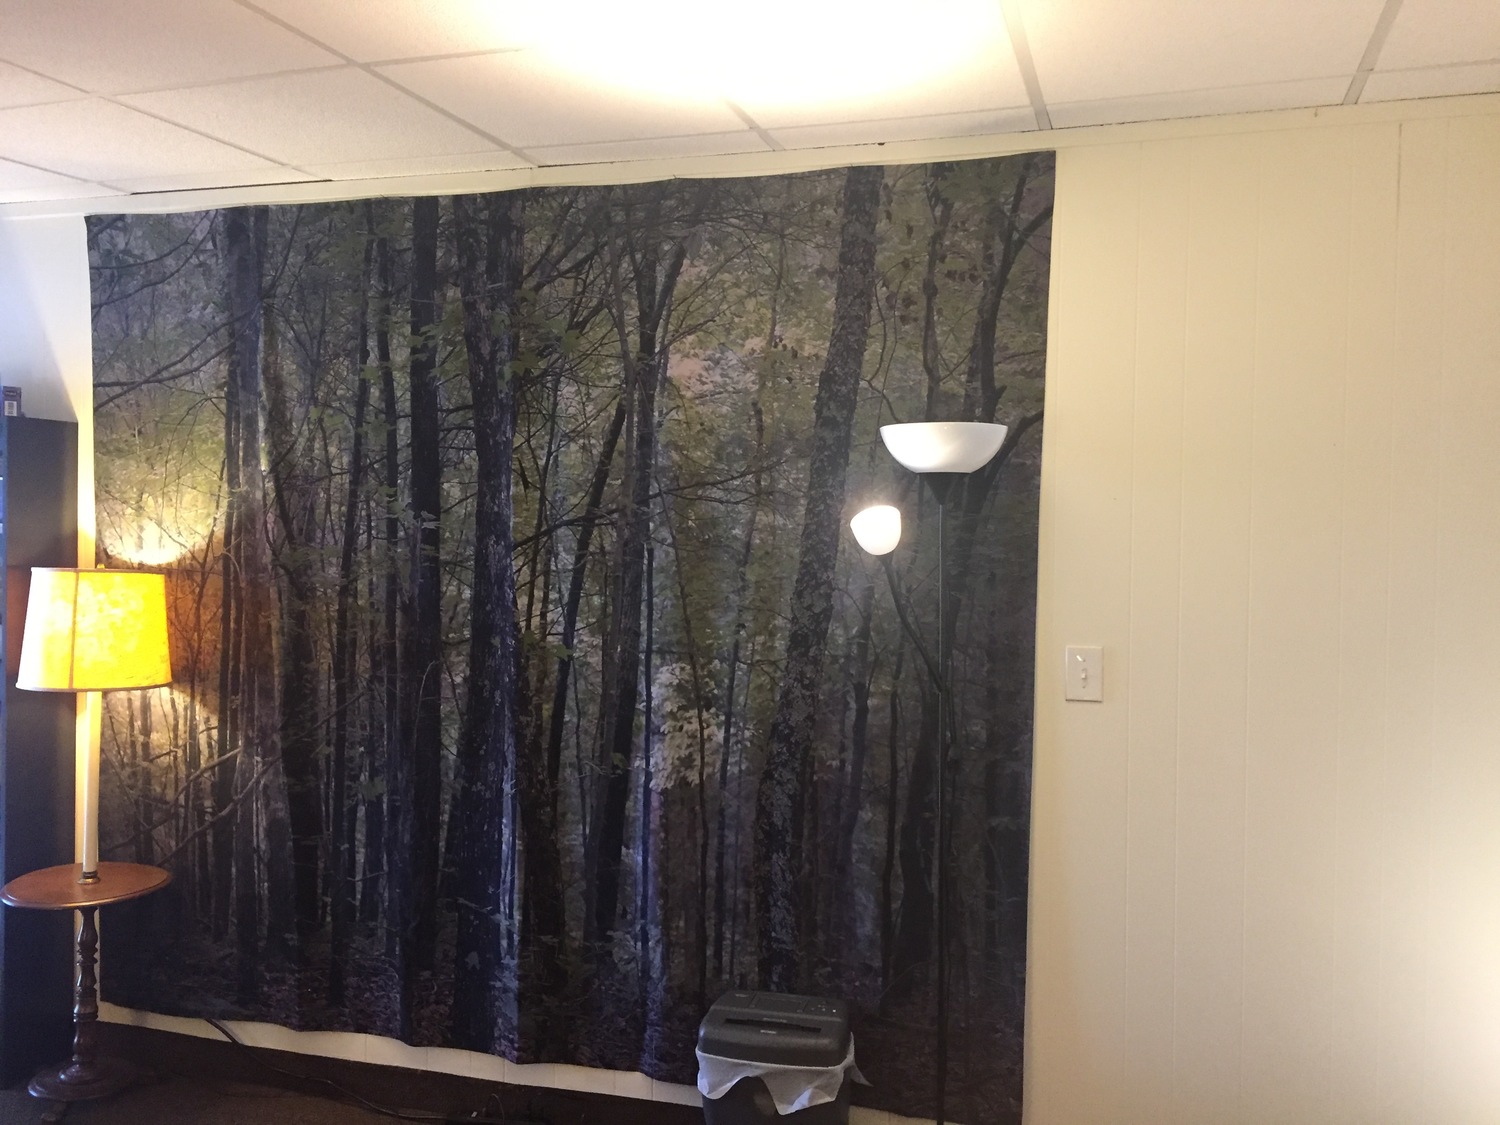 Gallery Photo of Tree tapestry